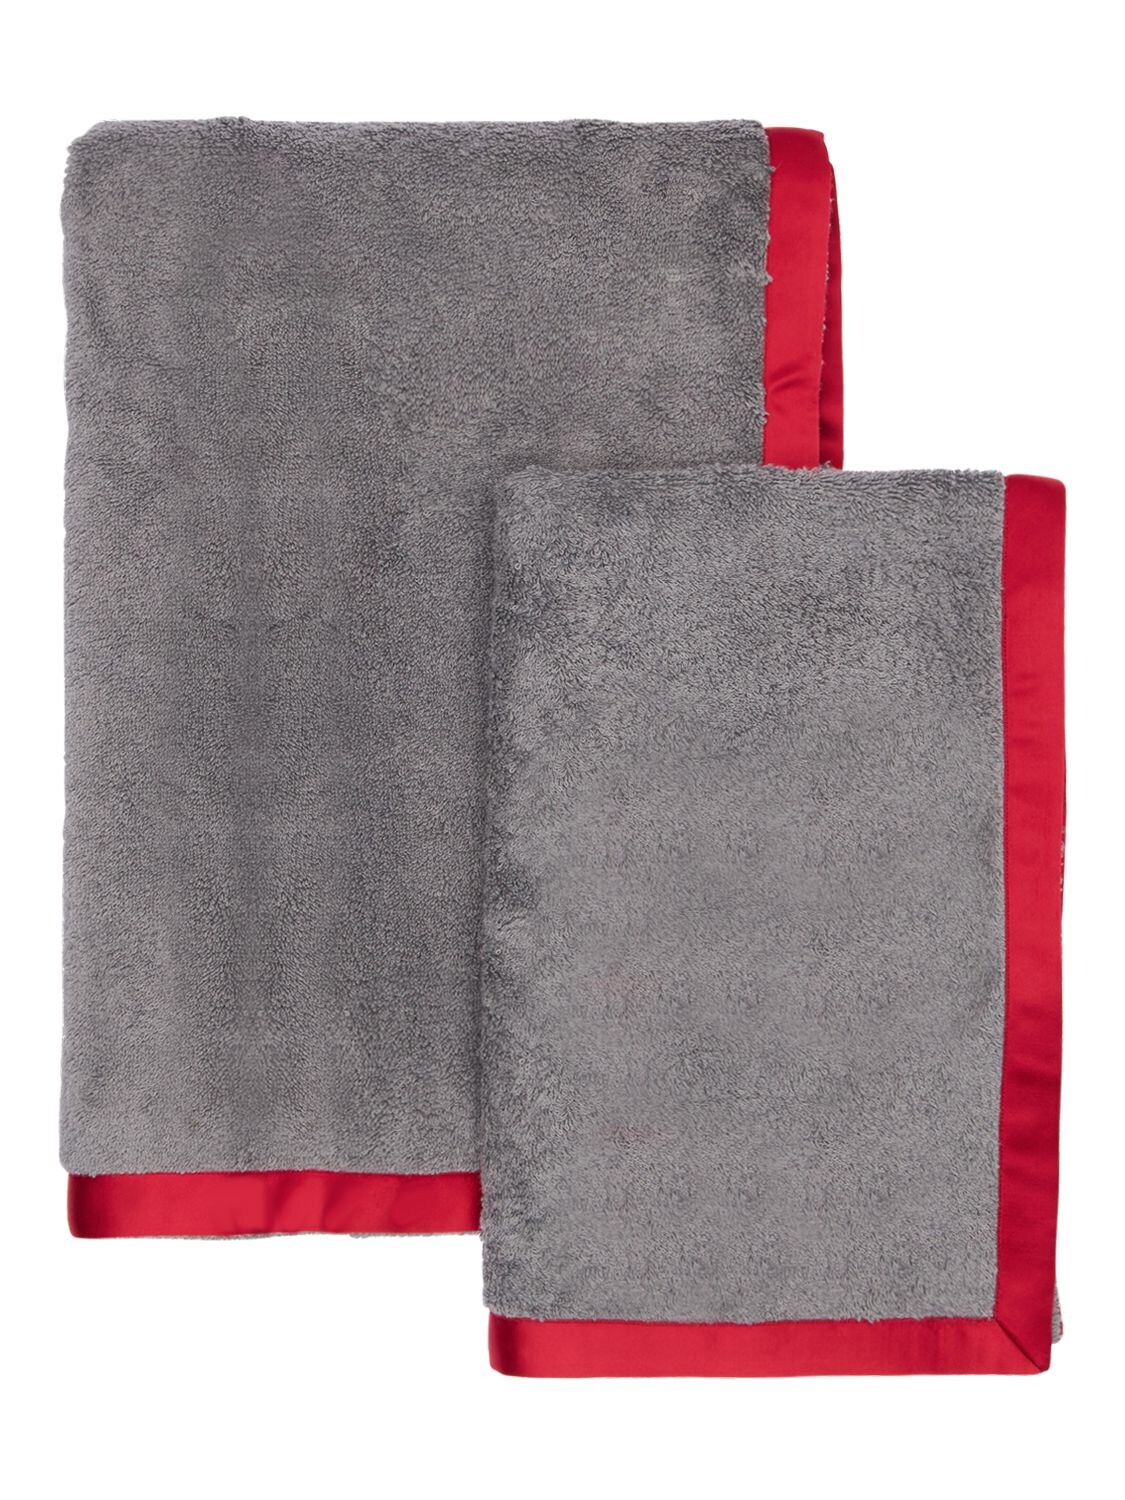 Alessandro Di Marco Set Of 2 Cotton Terrycloth Towels In Grey,red